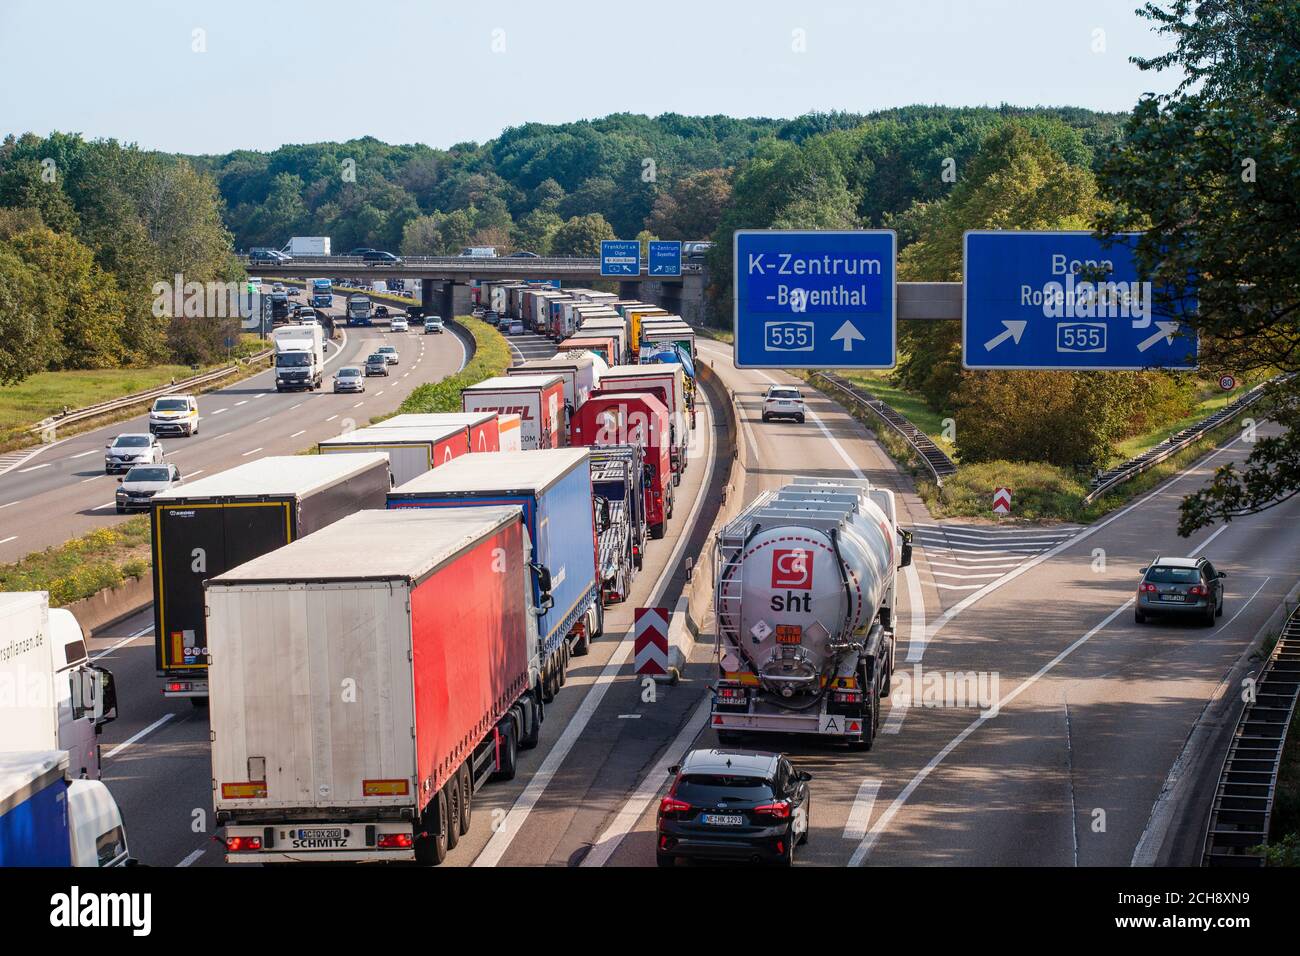 traffic jam on the A4 freeway in the south of Cologne, direction Frankfurt, Cologne, Germany.  Stau auf der Autobahn A4 im Koelner Sueden Fahrtrichtun Stock Photo